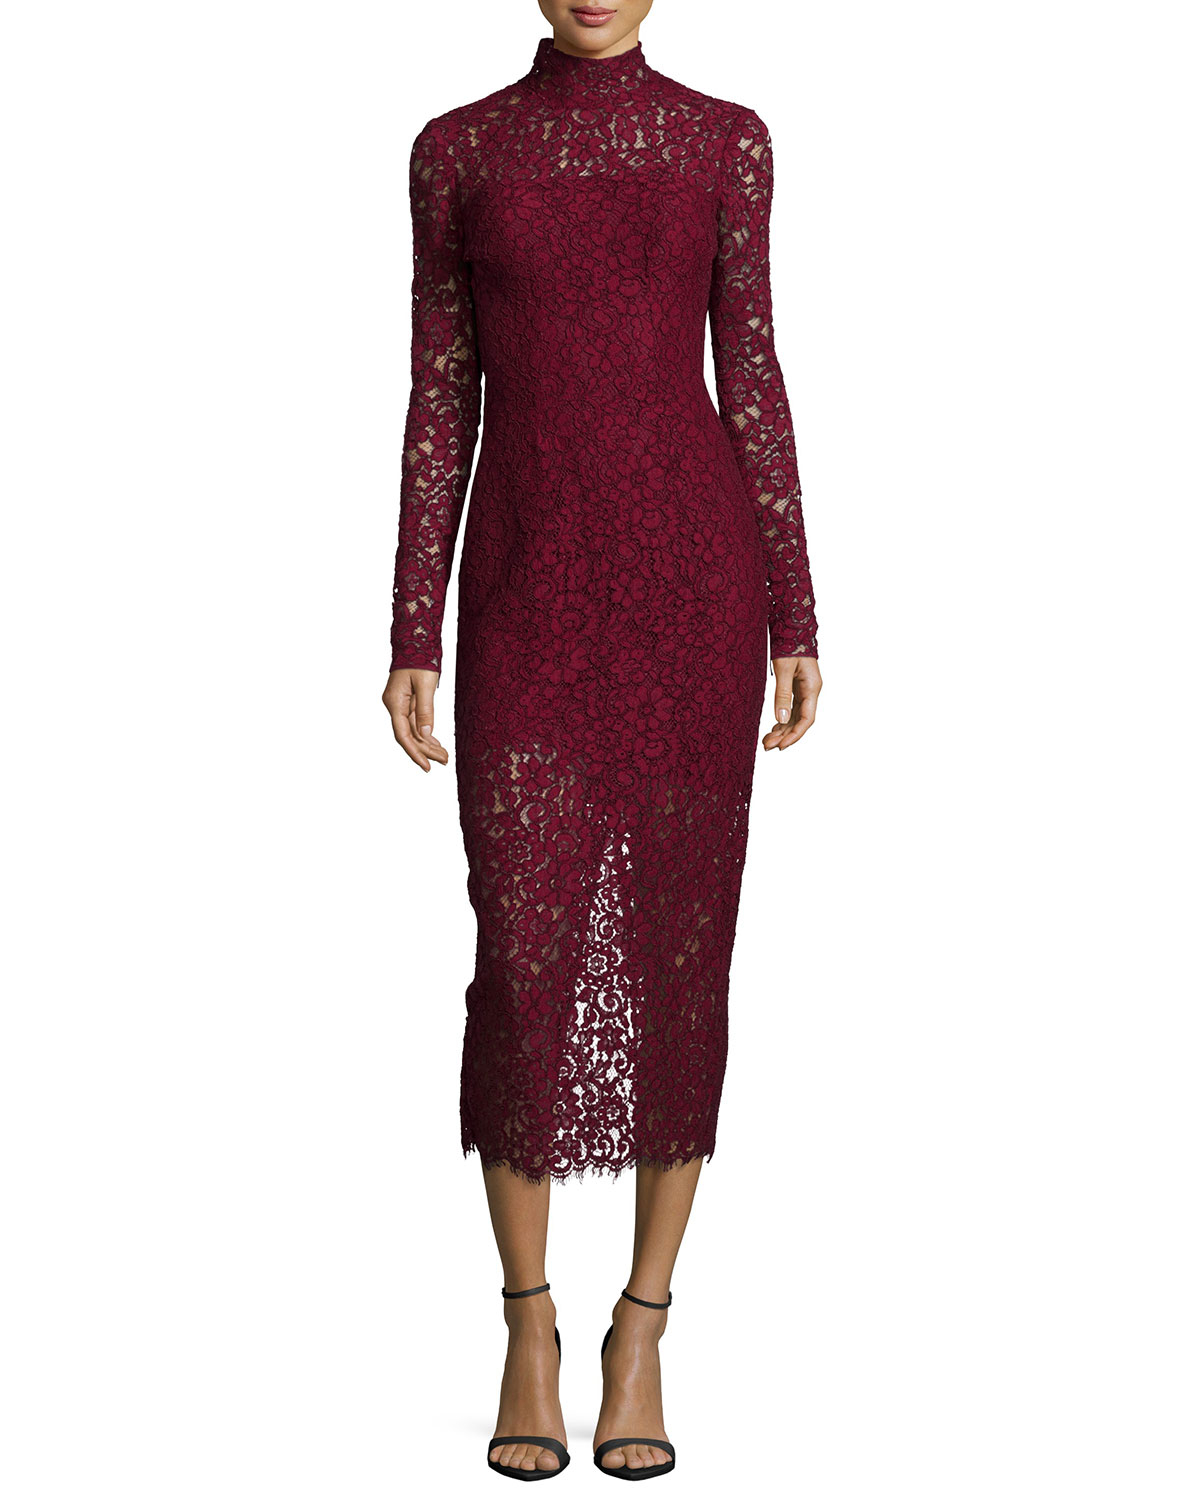 Lyst - Monique Lhuillier Long-sleeve Lace Midi Cocktail Dress in Red
 Midi Evening Dress